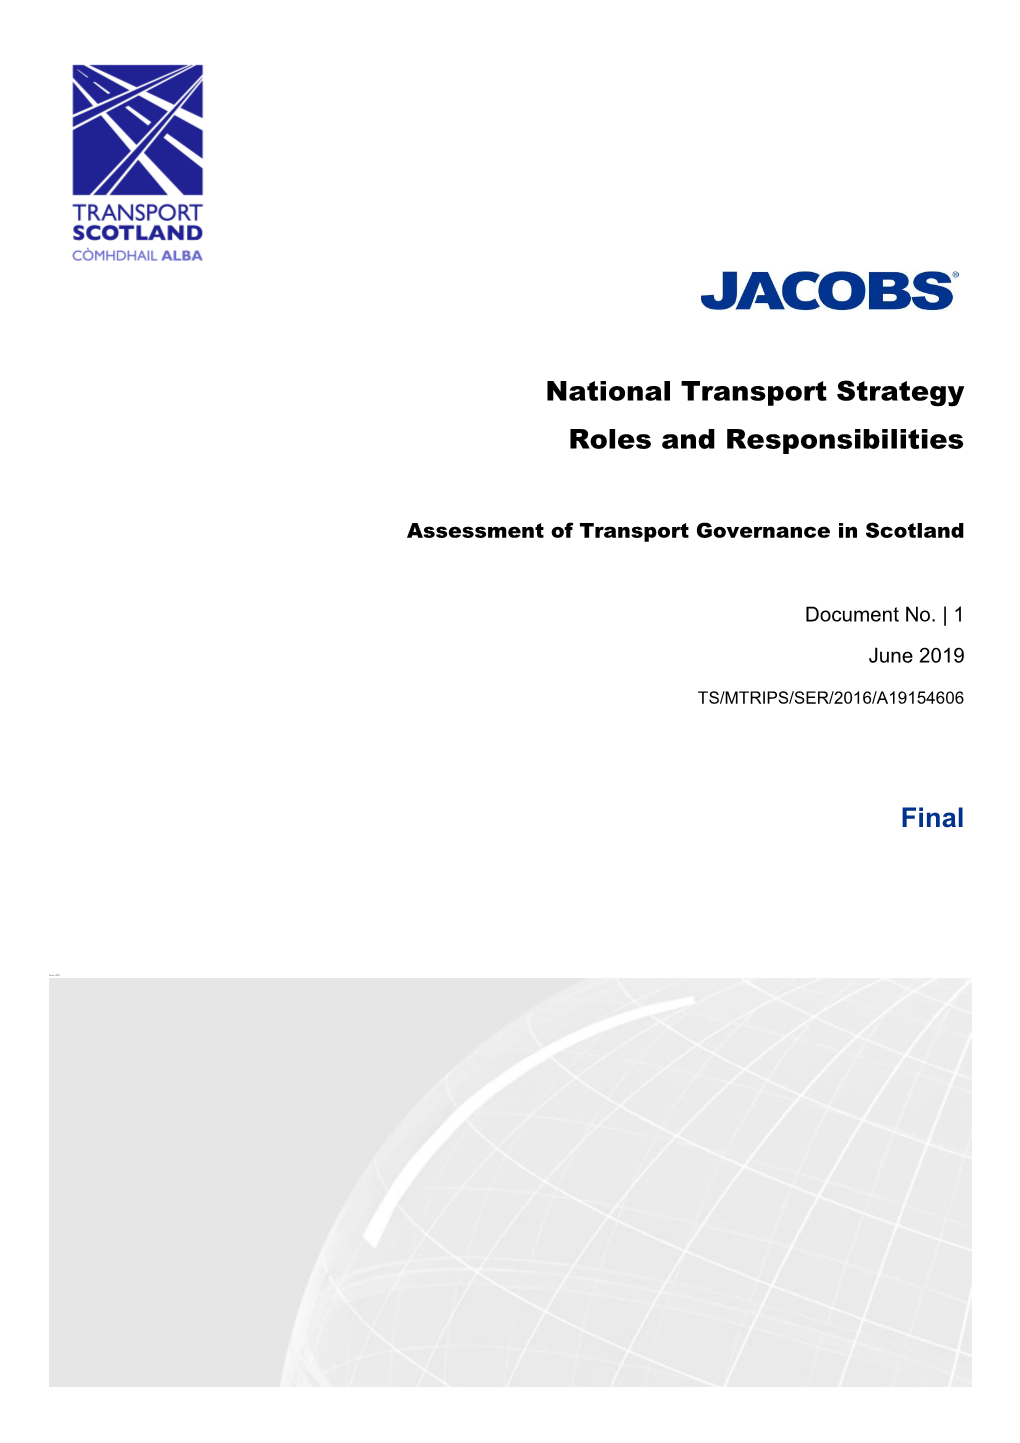 National Transport Strategy Roles and Responsibilities